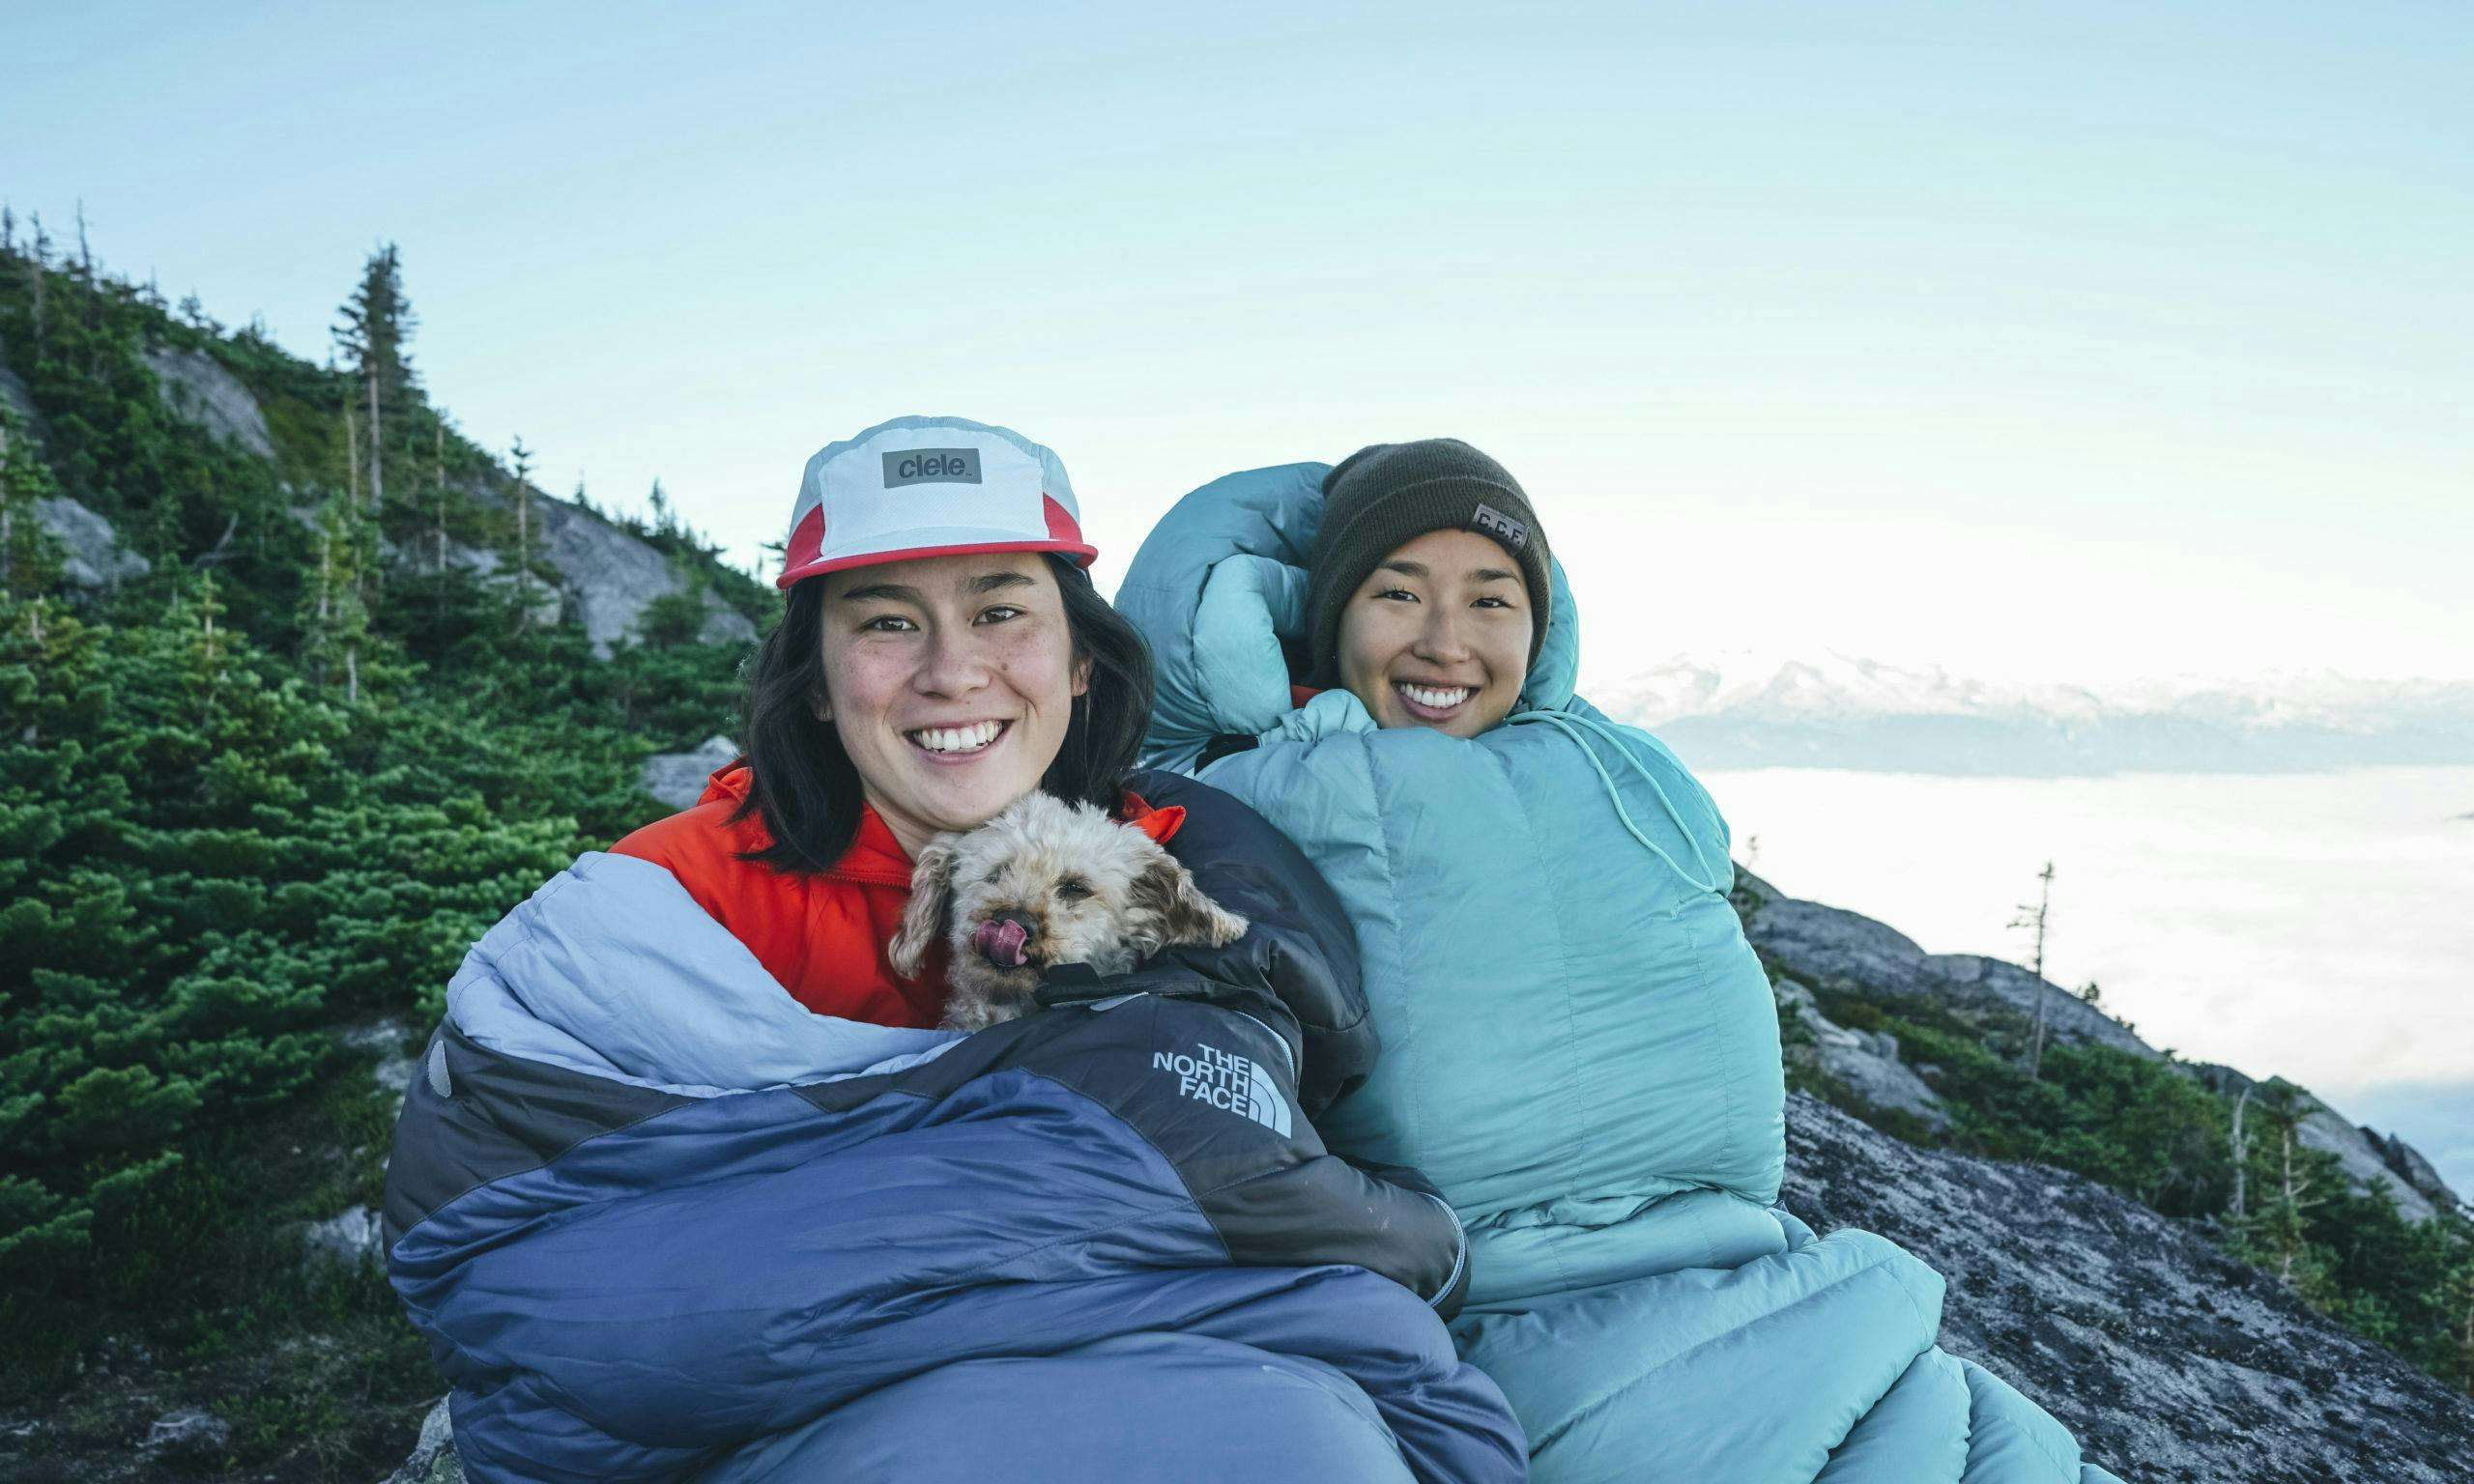 Yuki and friend in sleeping bags in the backcountry